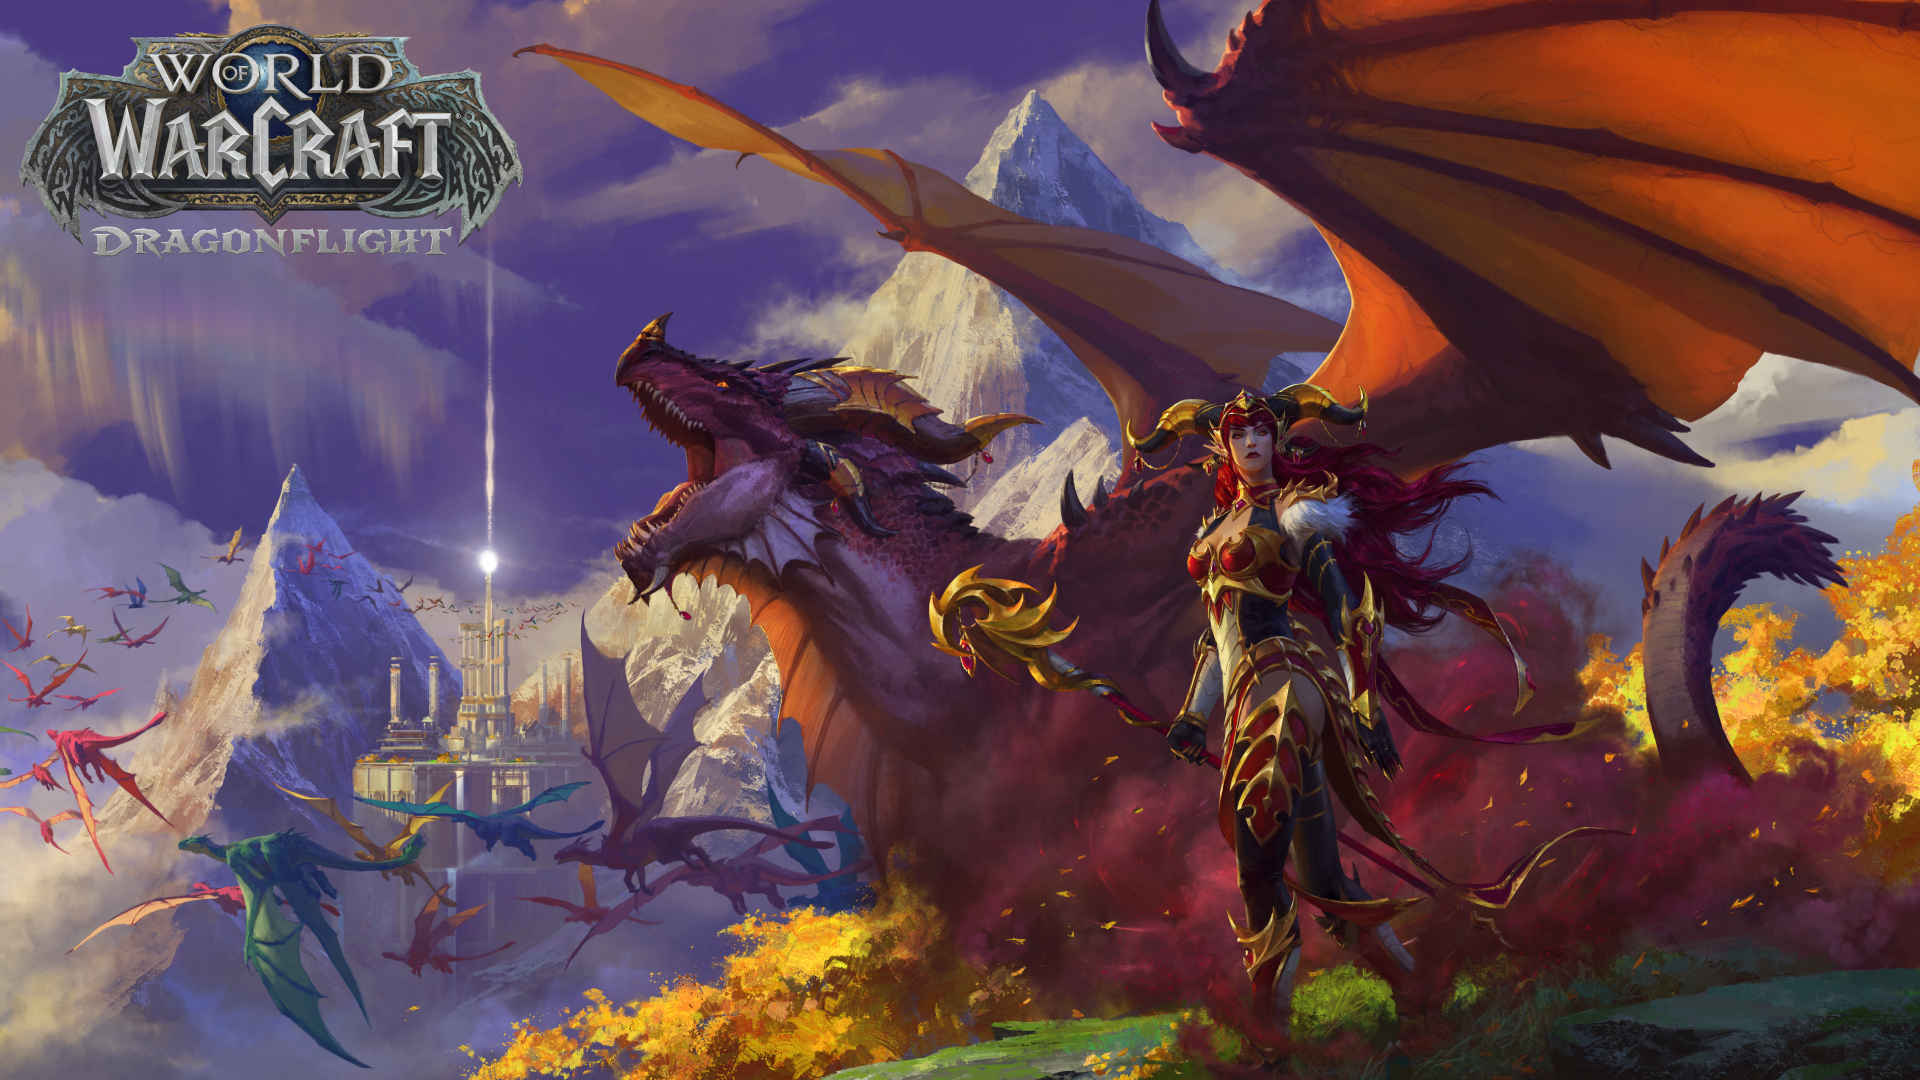 WoW Dragonflight release date announced: It's sooner than you think